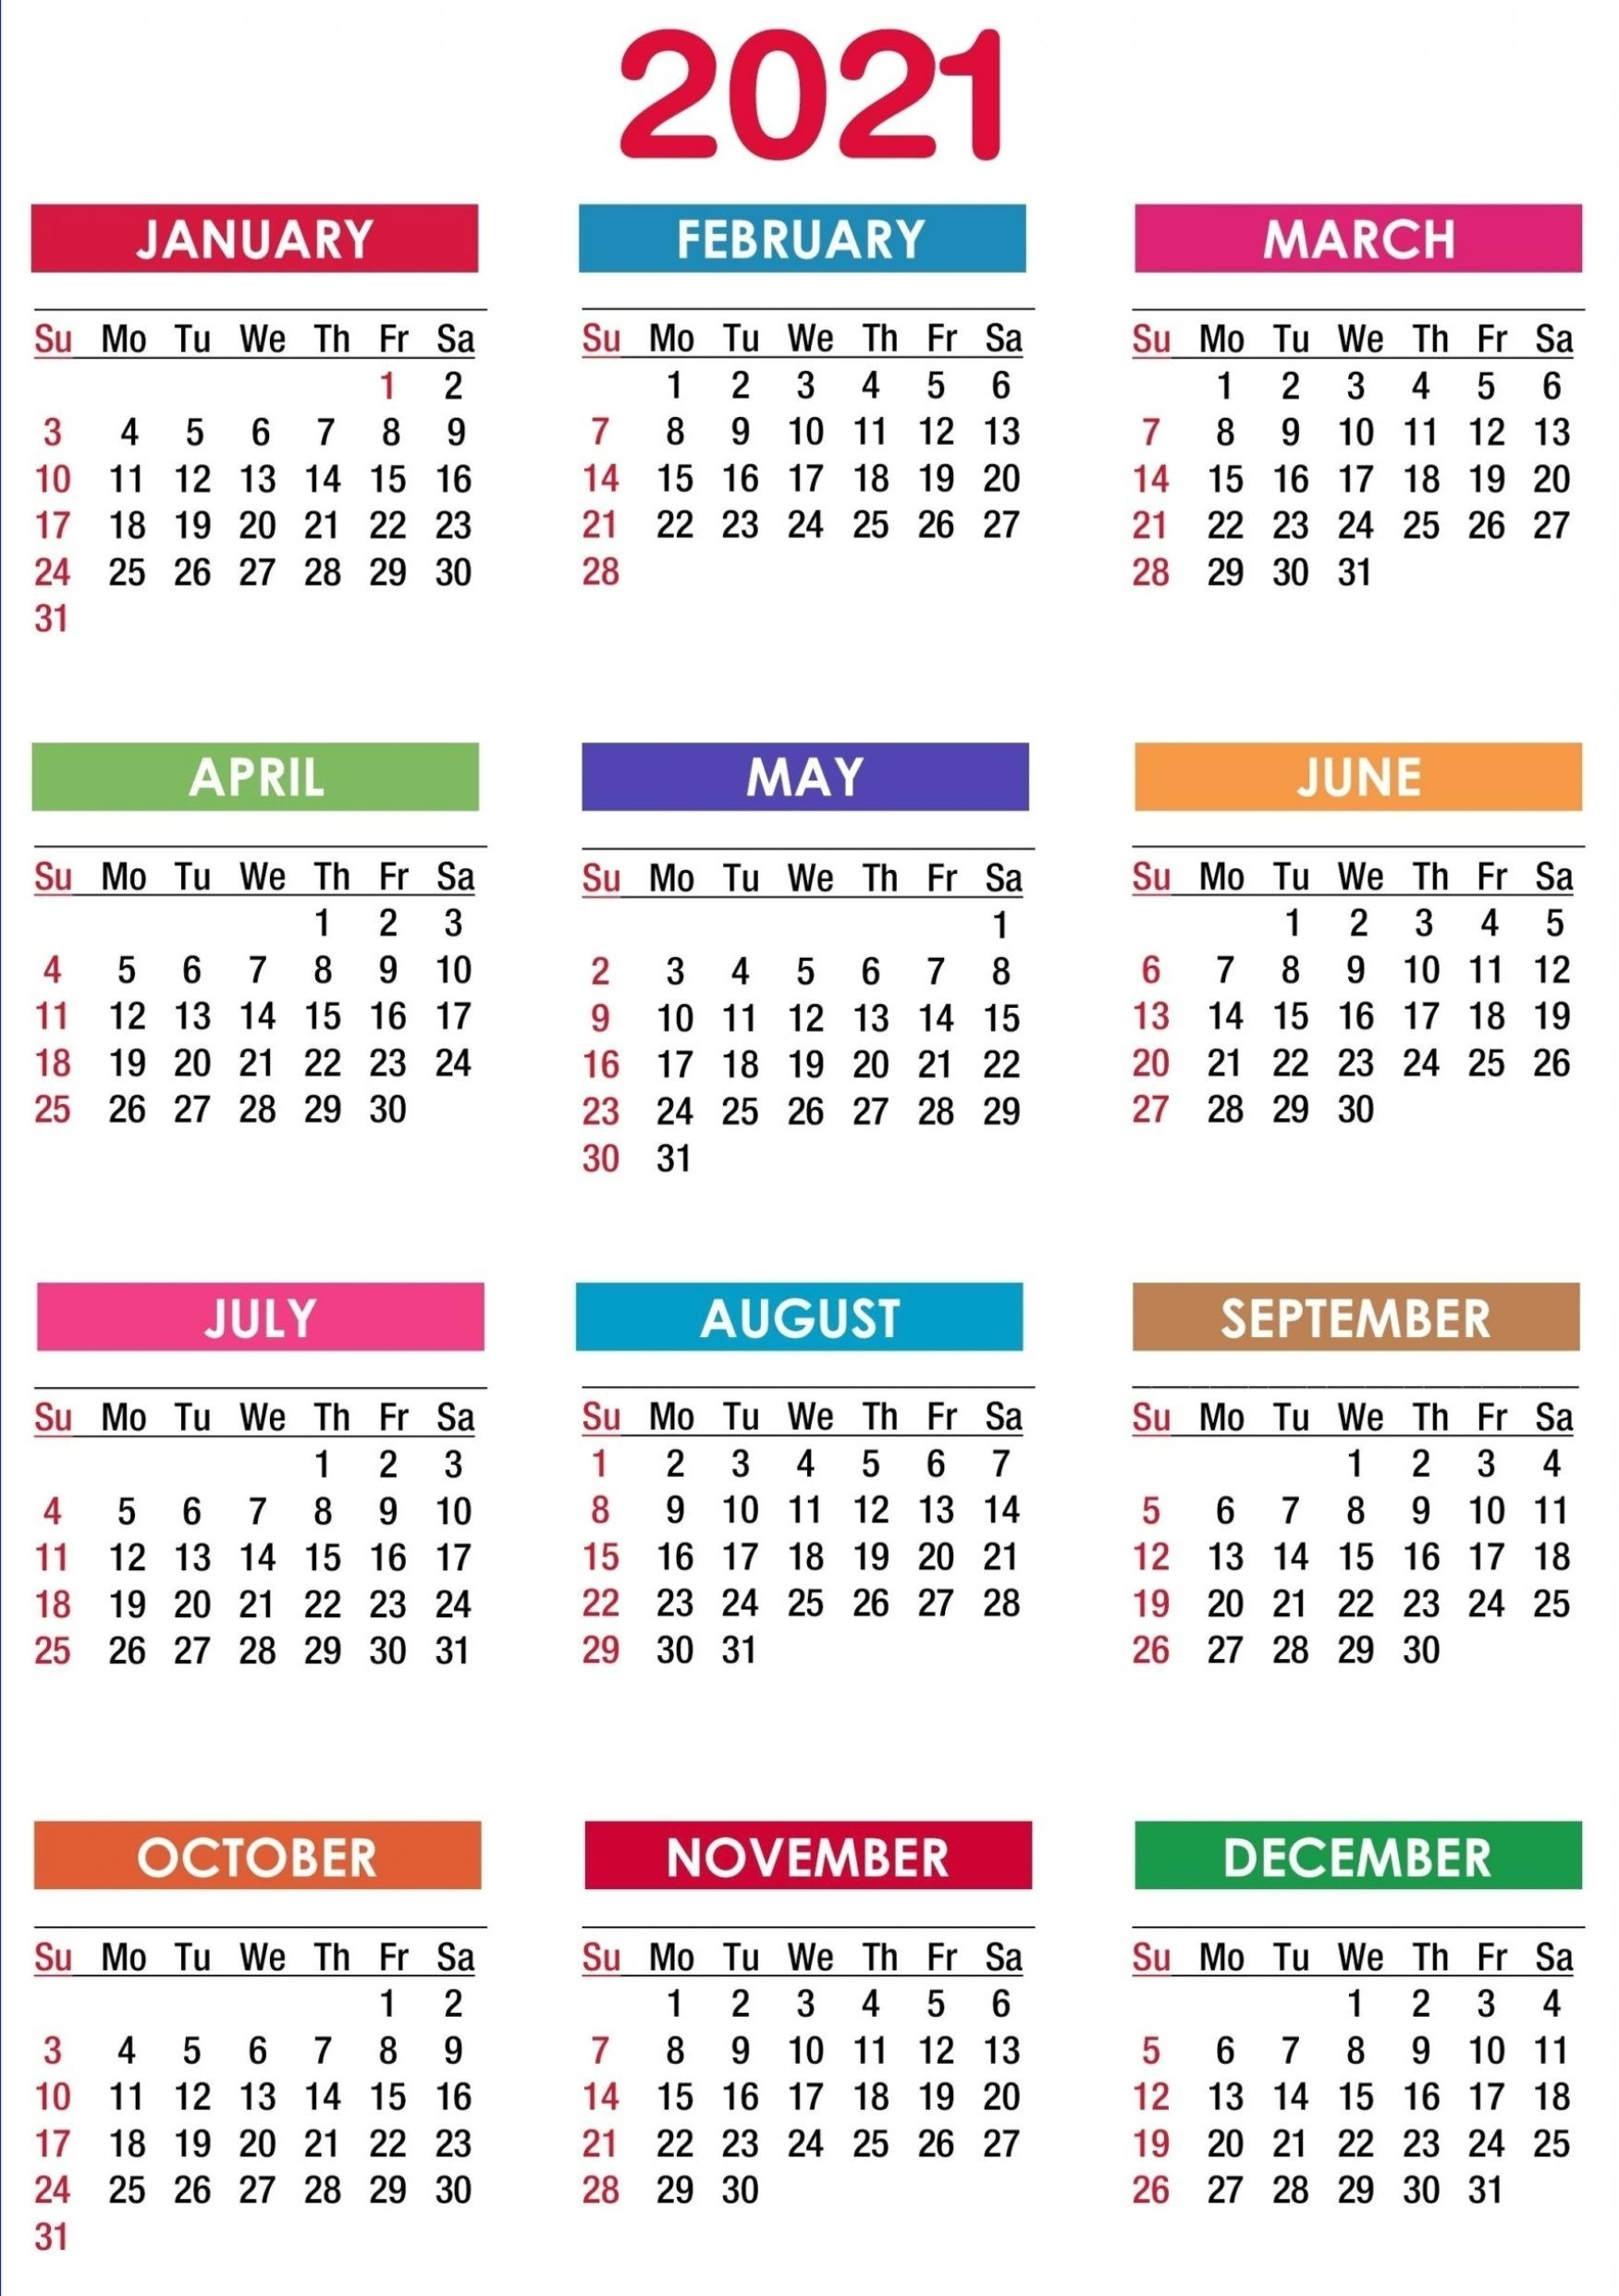 2021 Calendar Printable | 12 Months All In One | Printable